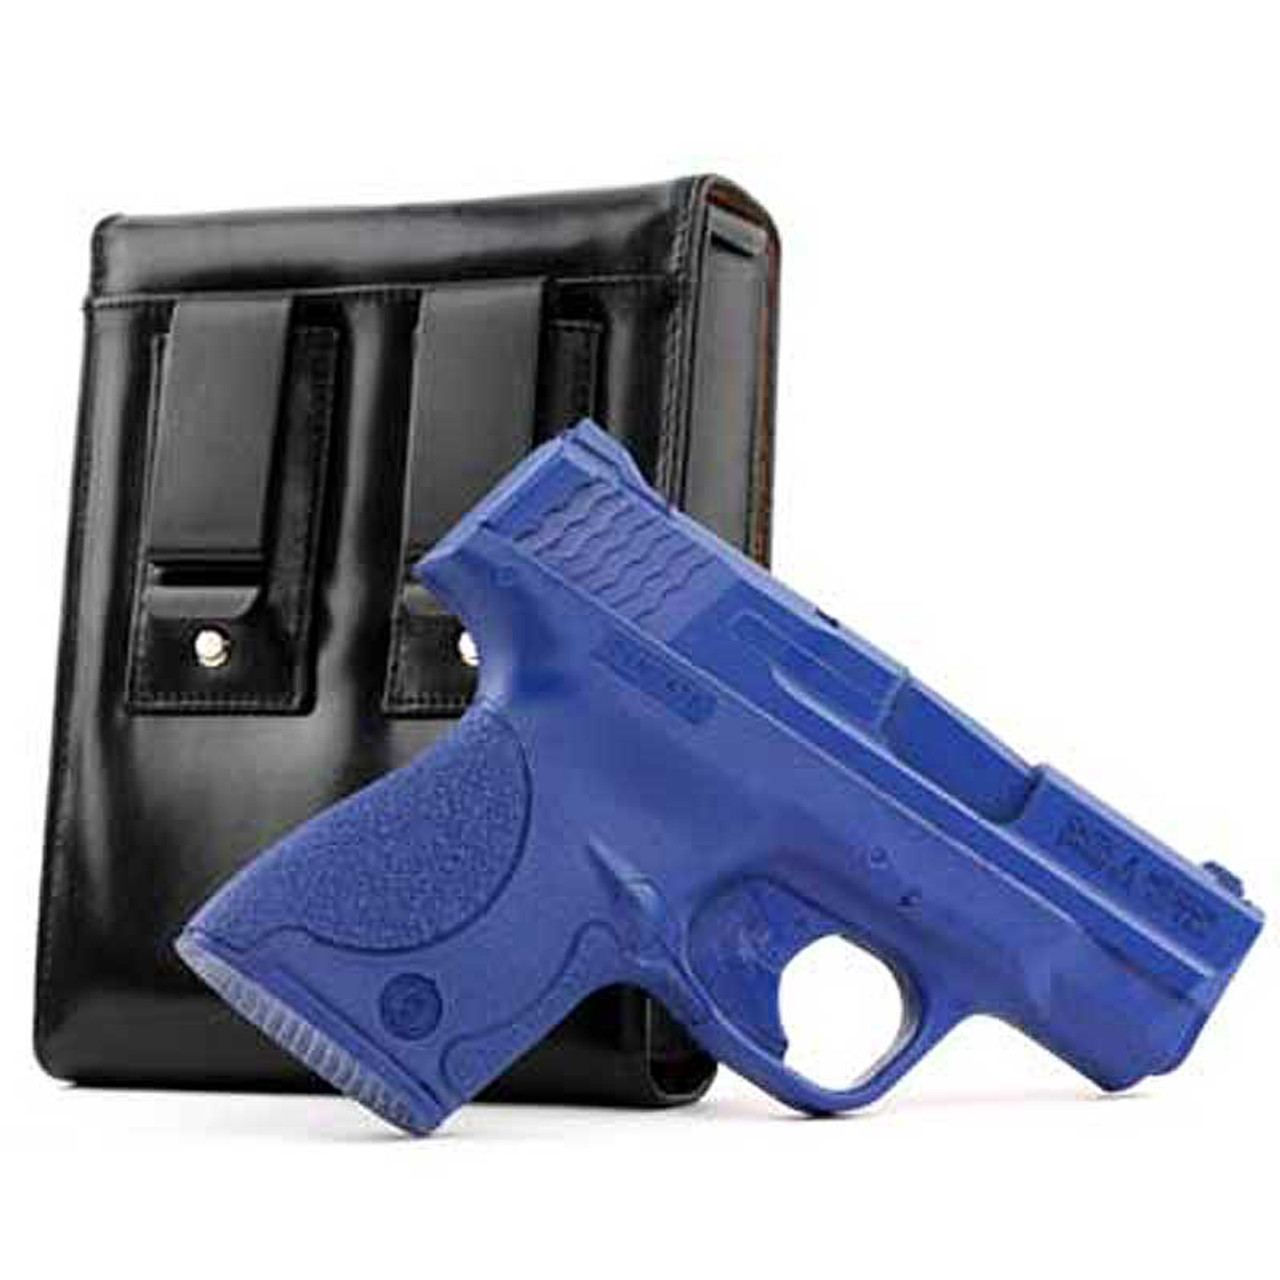 Index Finger Release Holster for Smith... Details about   Paddle Holster for S&W M&P Shield 9mm